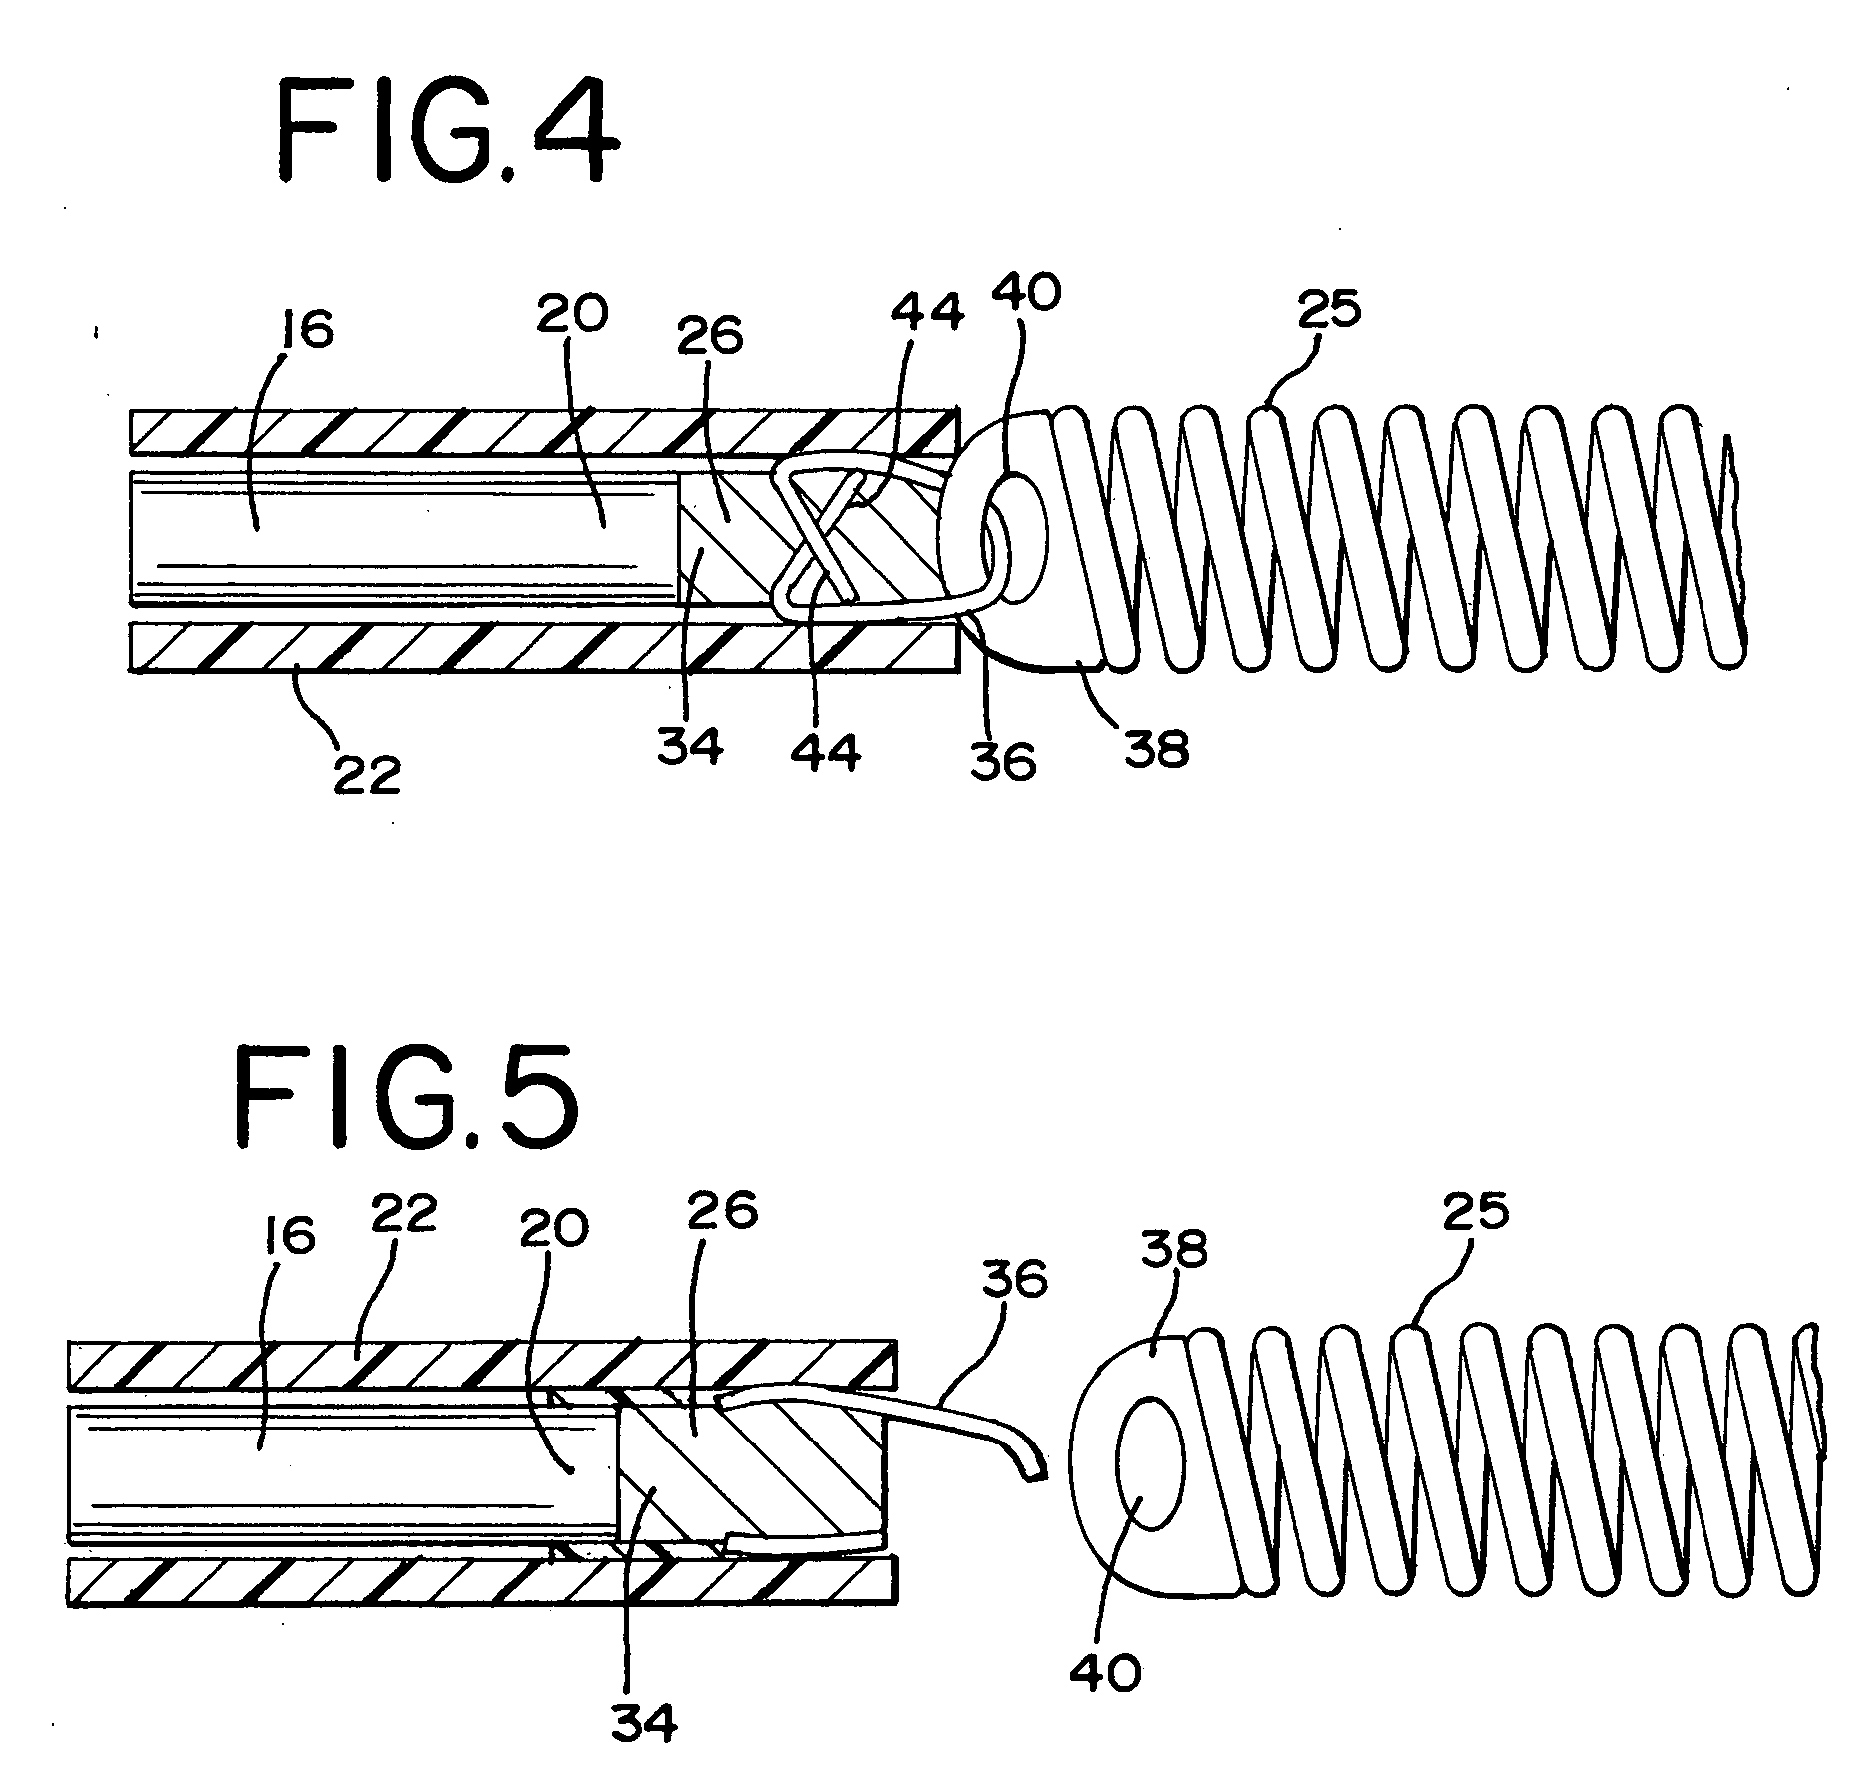 Laser-based vascular occlusion device detachment system